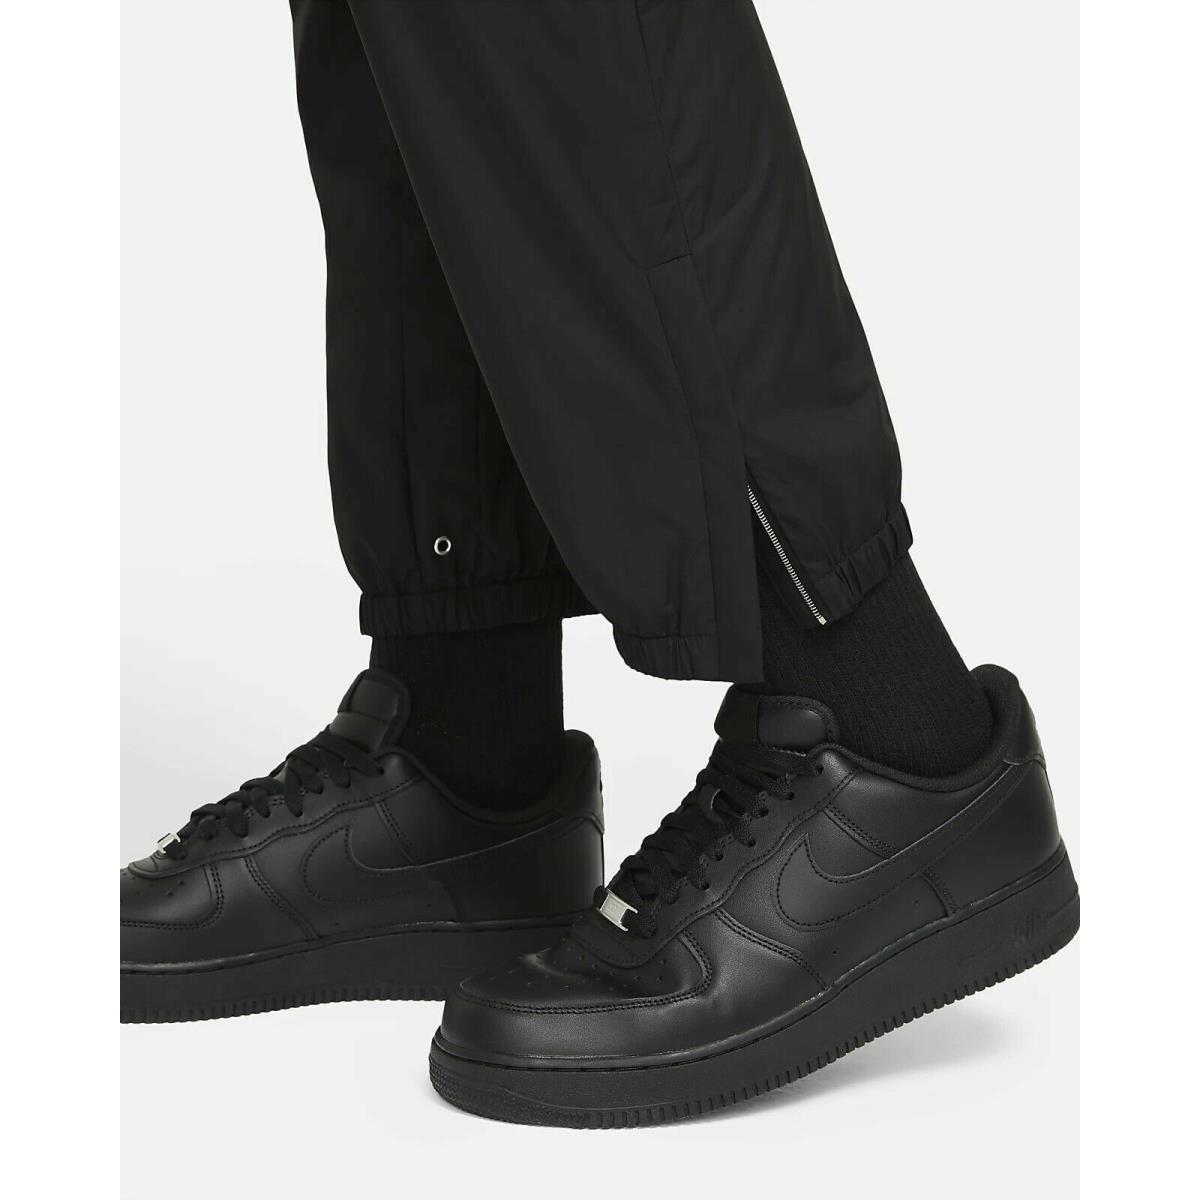 Nike clothing Every Stitch Considered Pants - Black 6